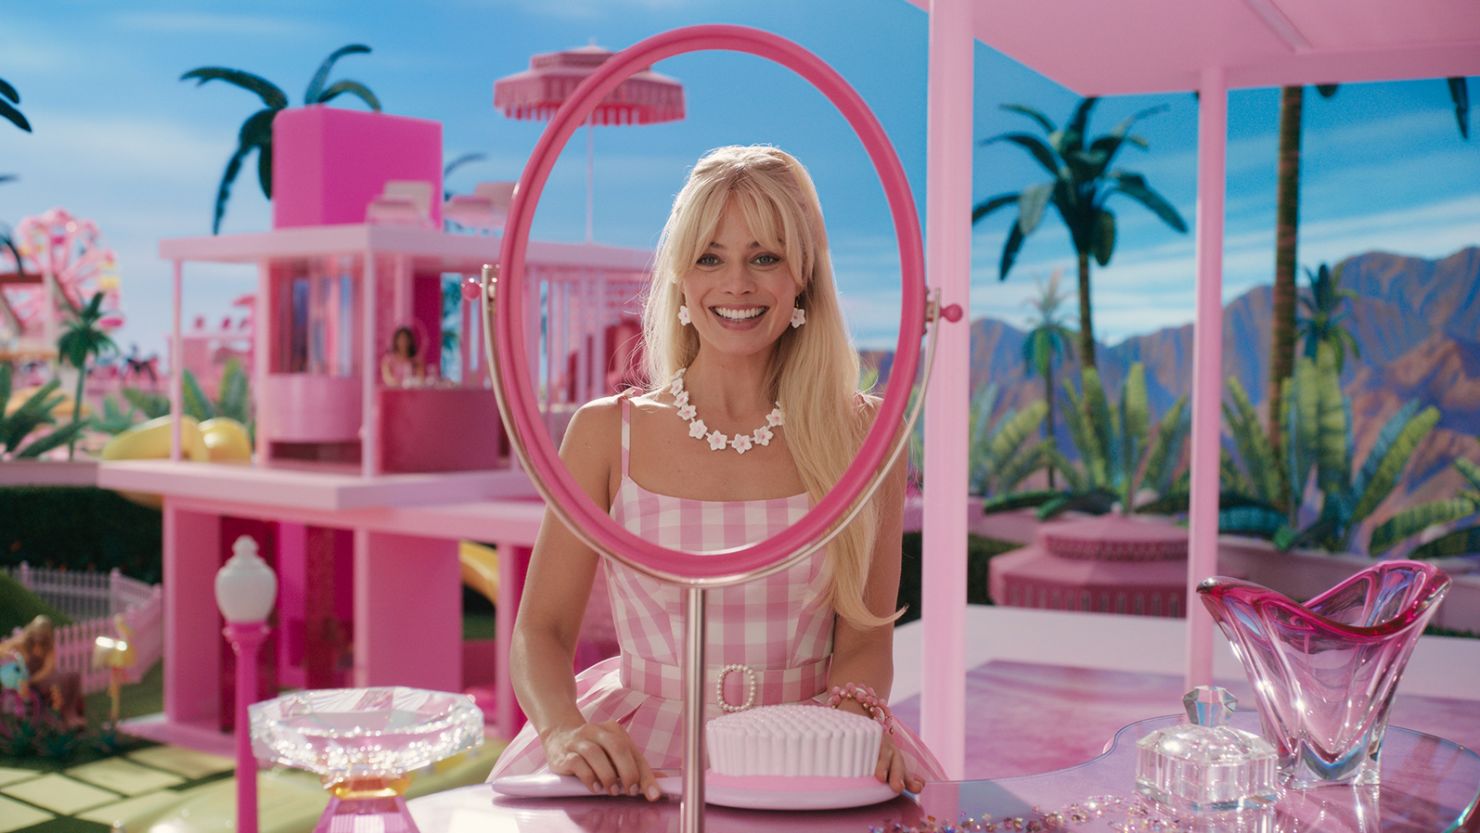 Margot Robbie stars in "Barbie," a movie that has some adults reliving their childhoods by buying "emotional support Barbies."